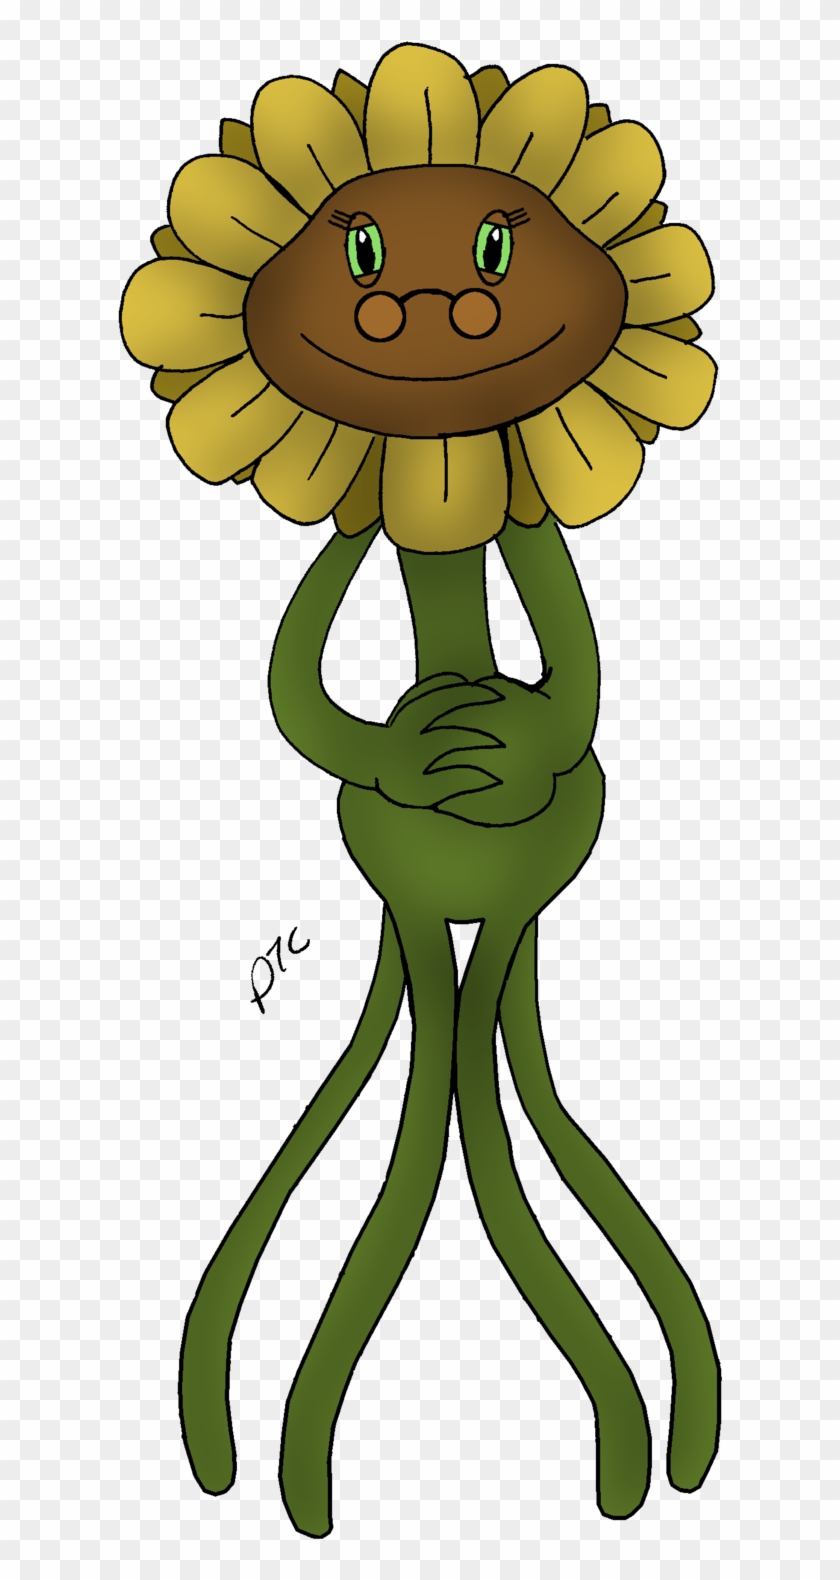 Solana The Sunflower By Rose-supreme - Plants Vs. Zombies #325104